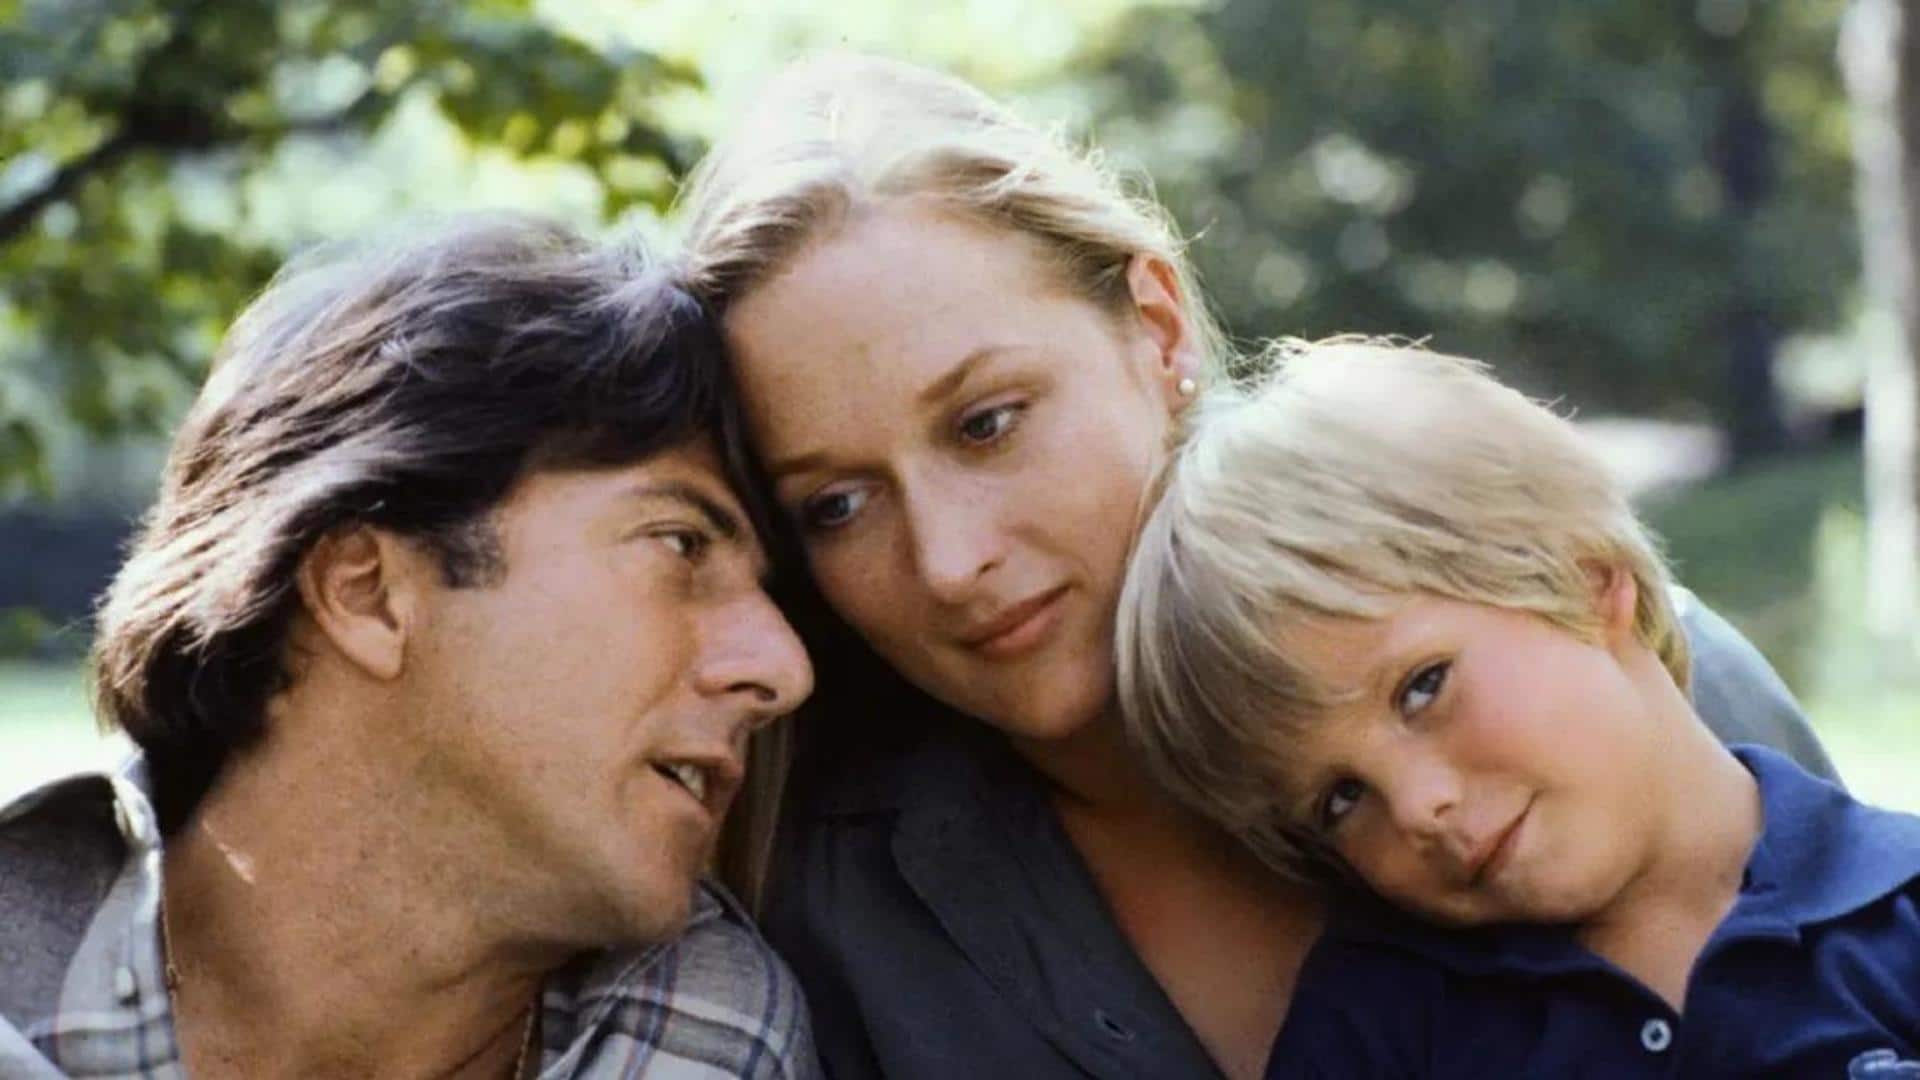 Valentine's Week: Let's celebrate familial love with these 5 movies